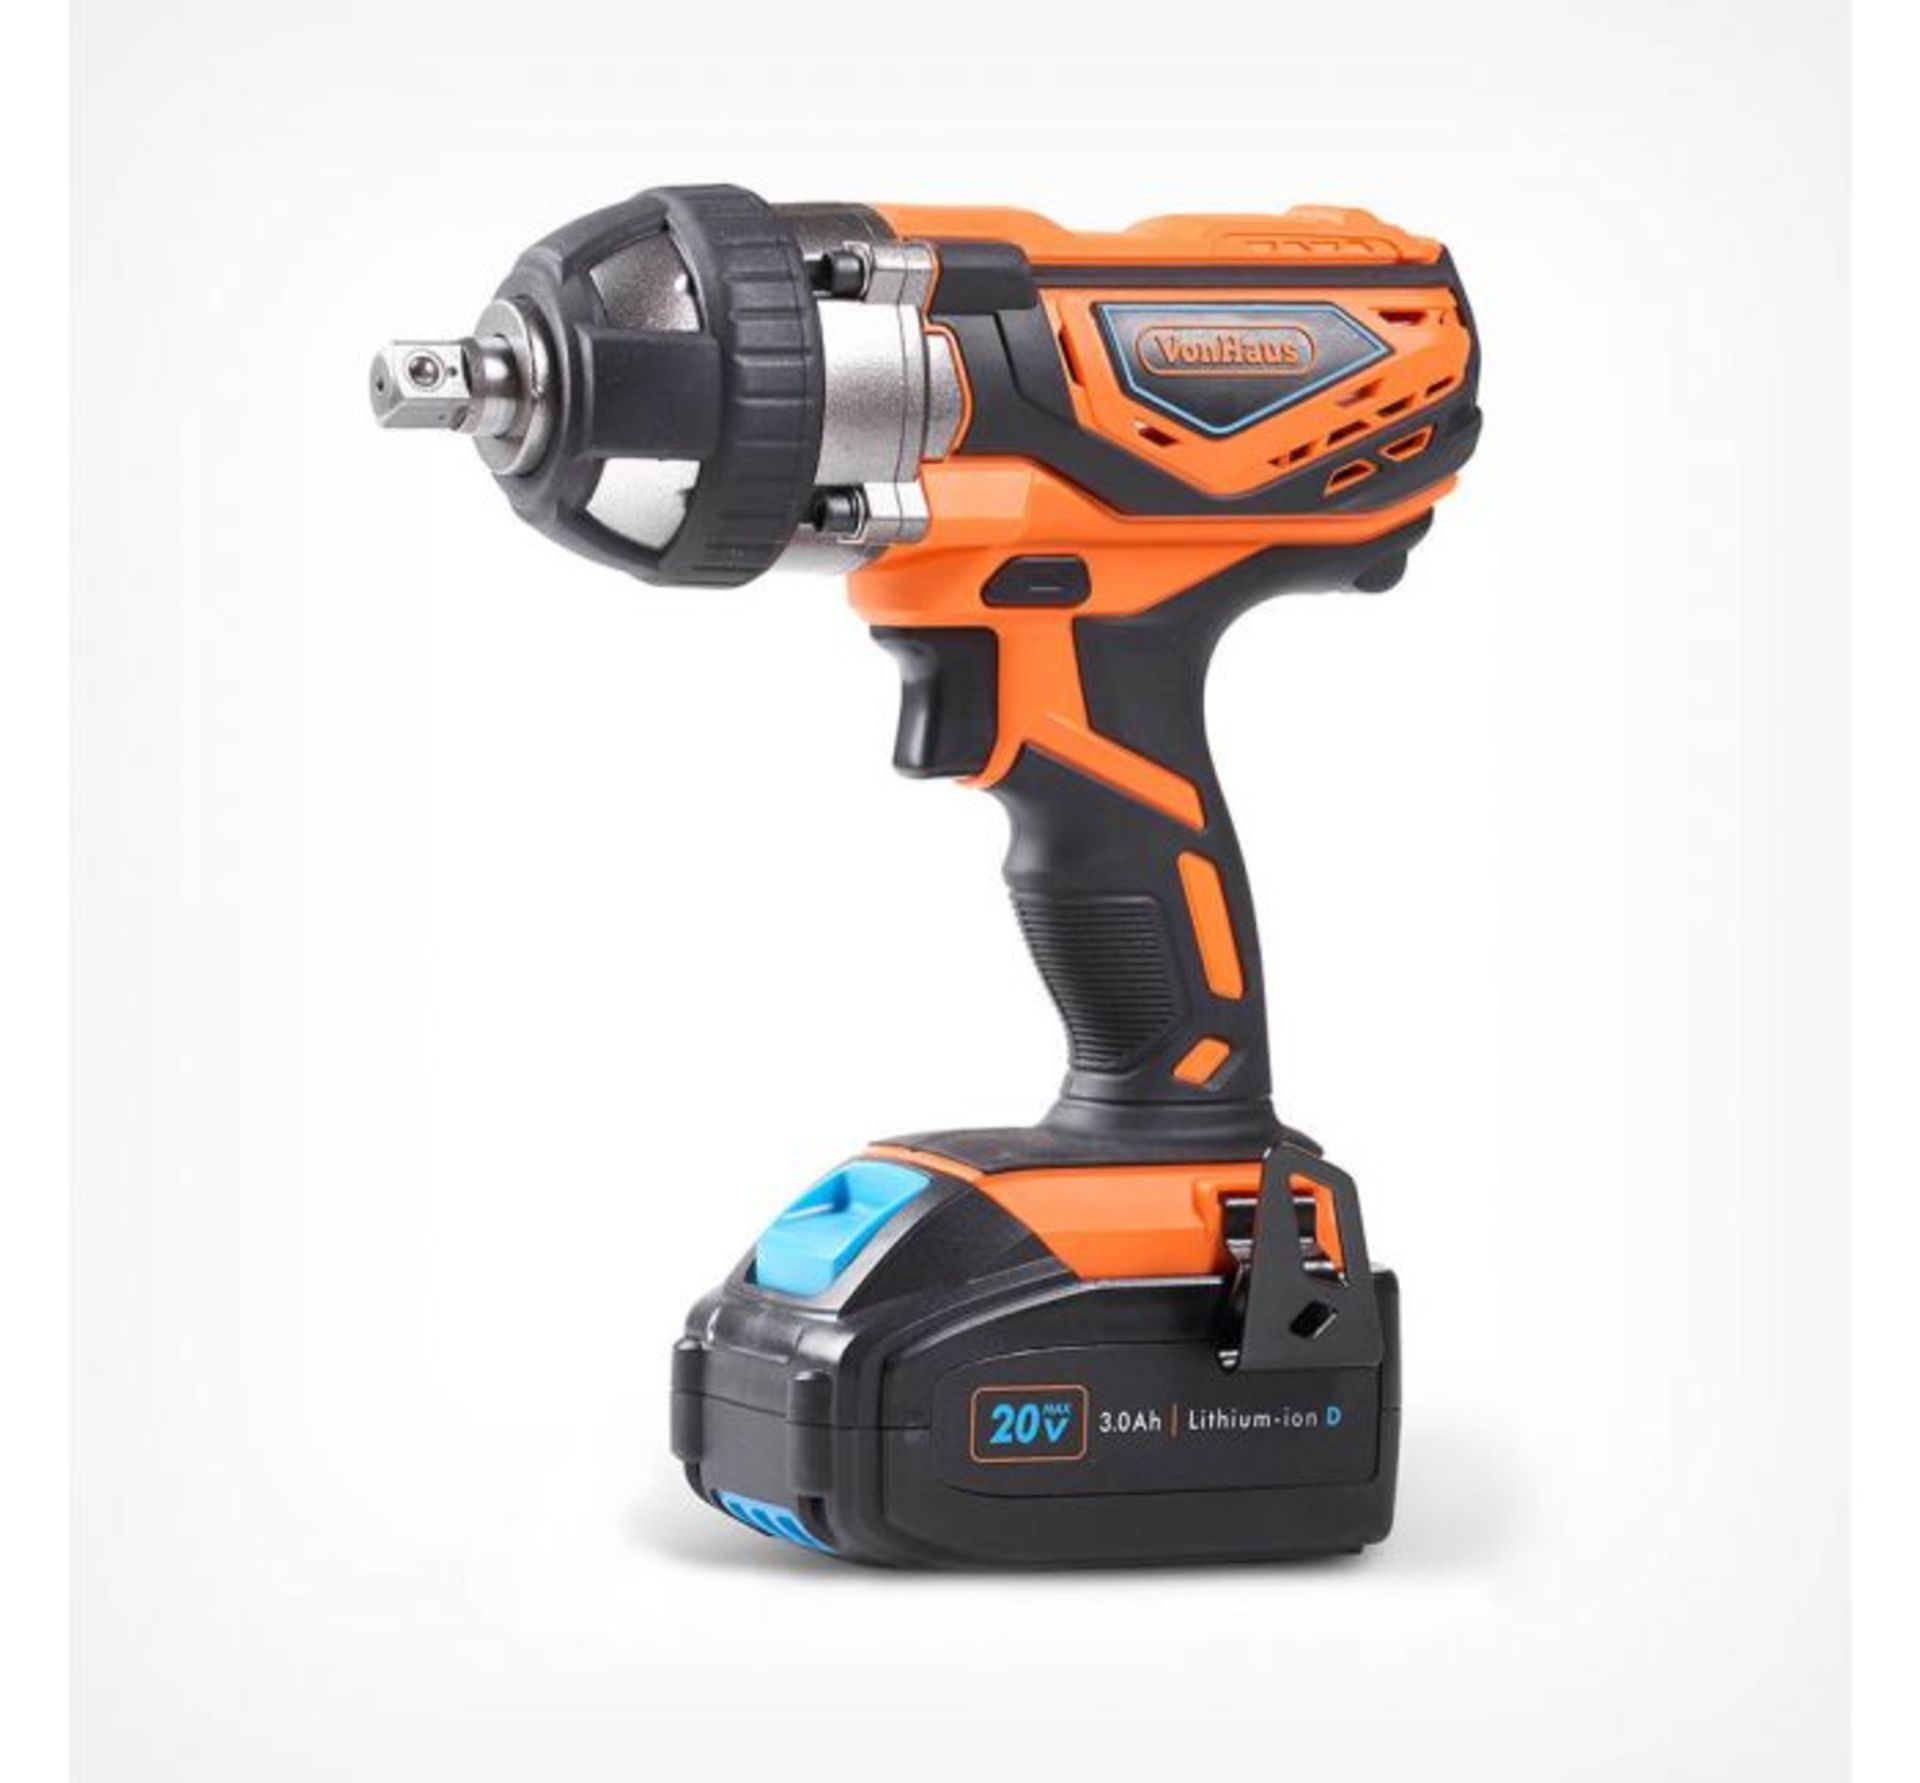 (F14) 20V Max Impact Wrench Maximum torque of 240Nm makes light work of removing rusted-on or ... - Image 2 of 4